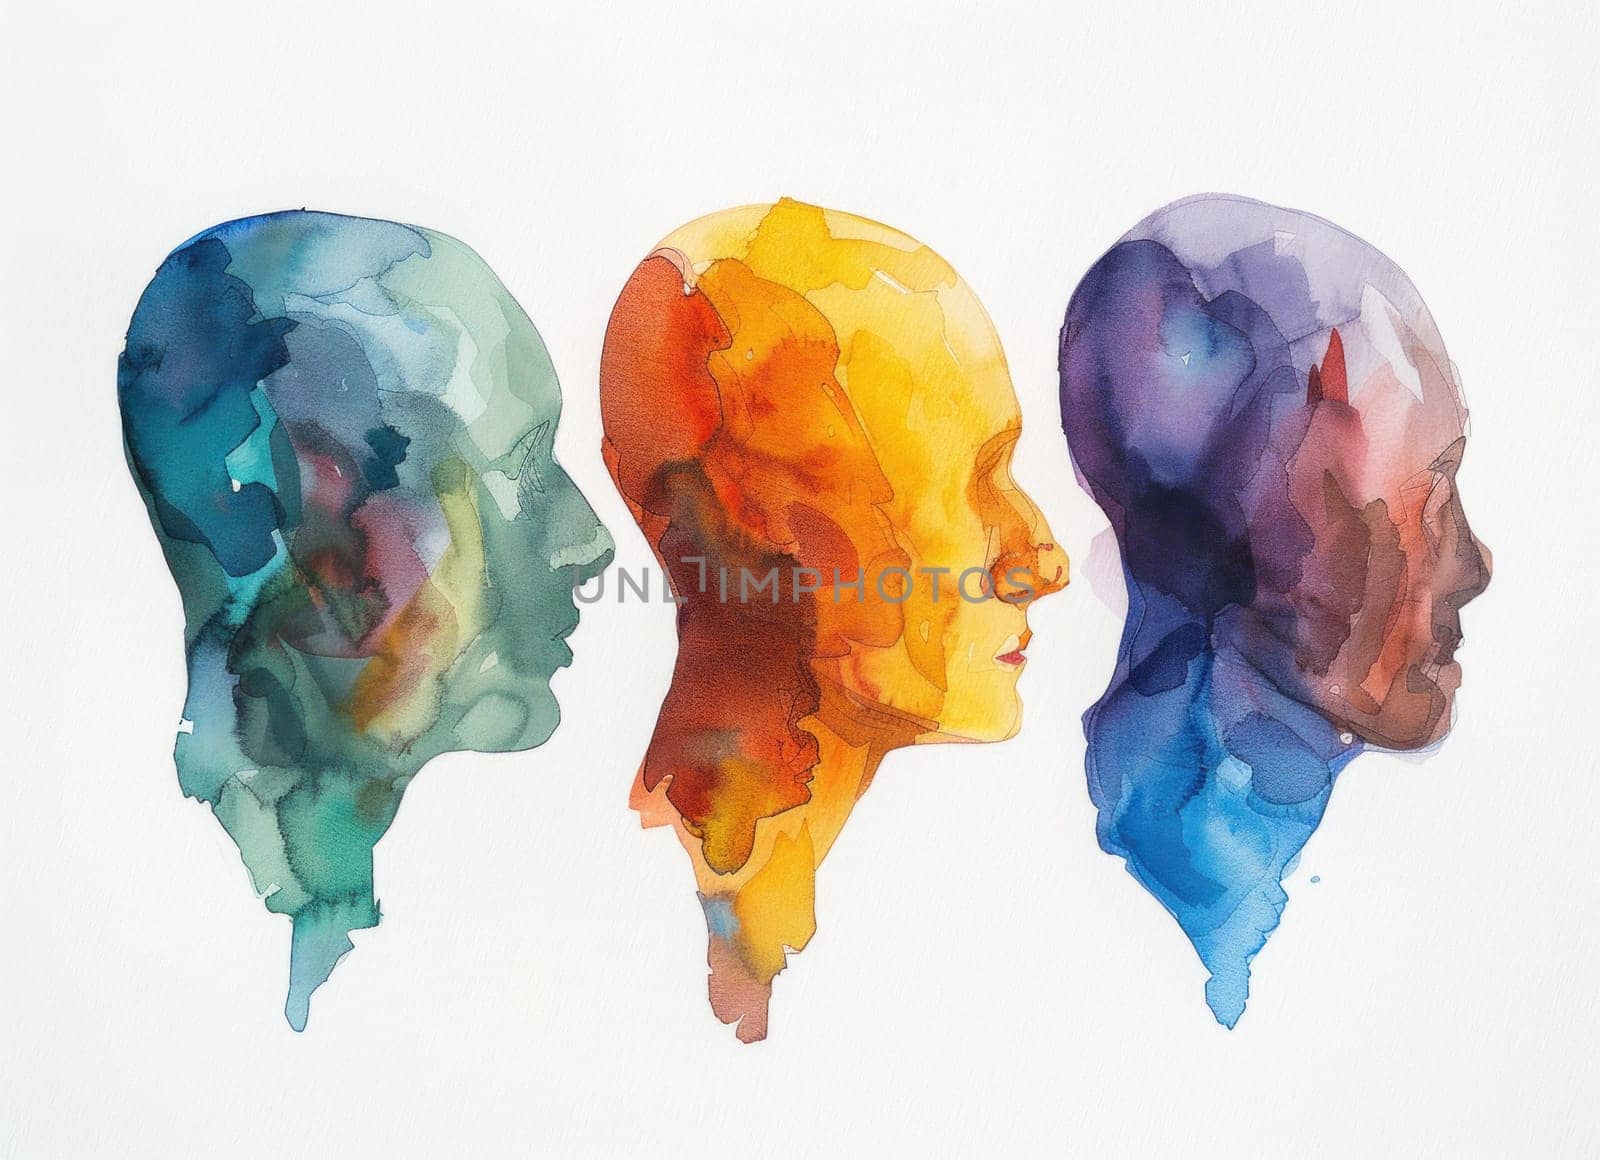 Watercolor paintings of diverse heads in various colors on white background, artistic beauty and diversity theme by Vichizh